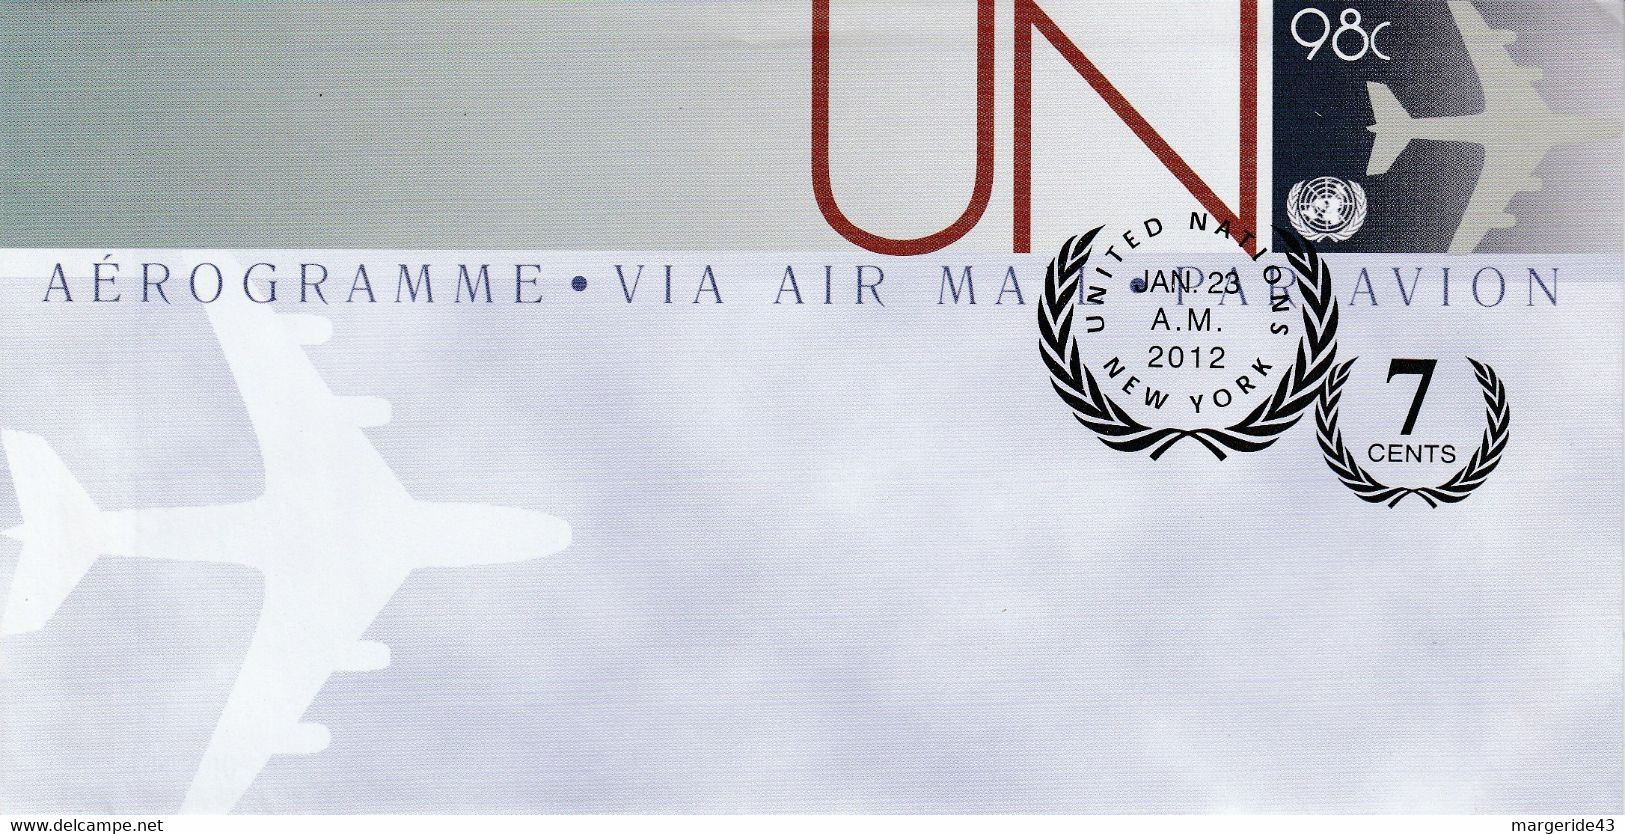 NATIONS UNIES 2012 AEROGRAMME FDC 98 CENTS - Covers & Documents